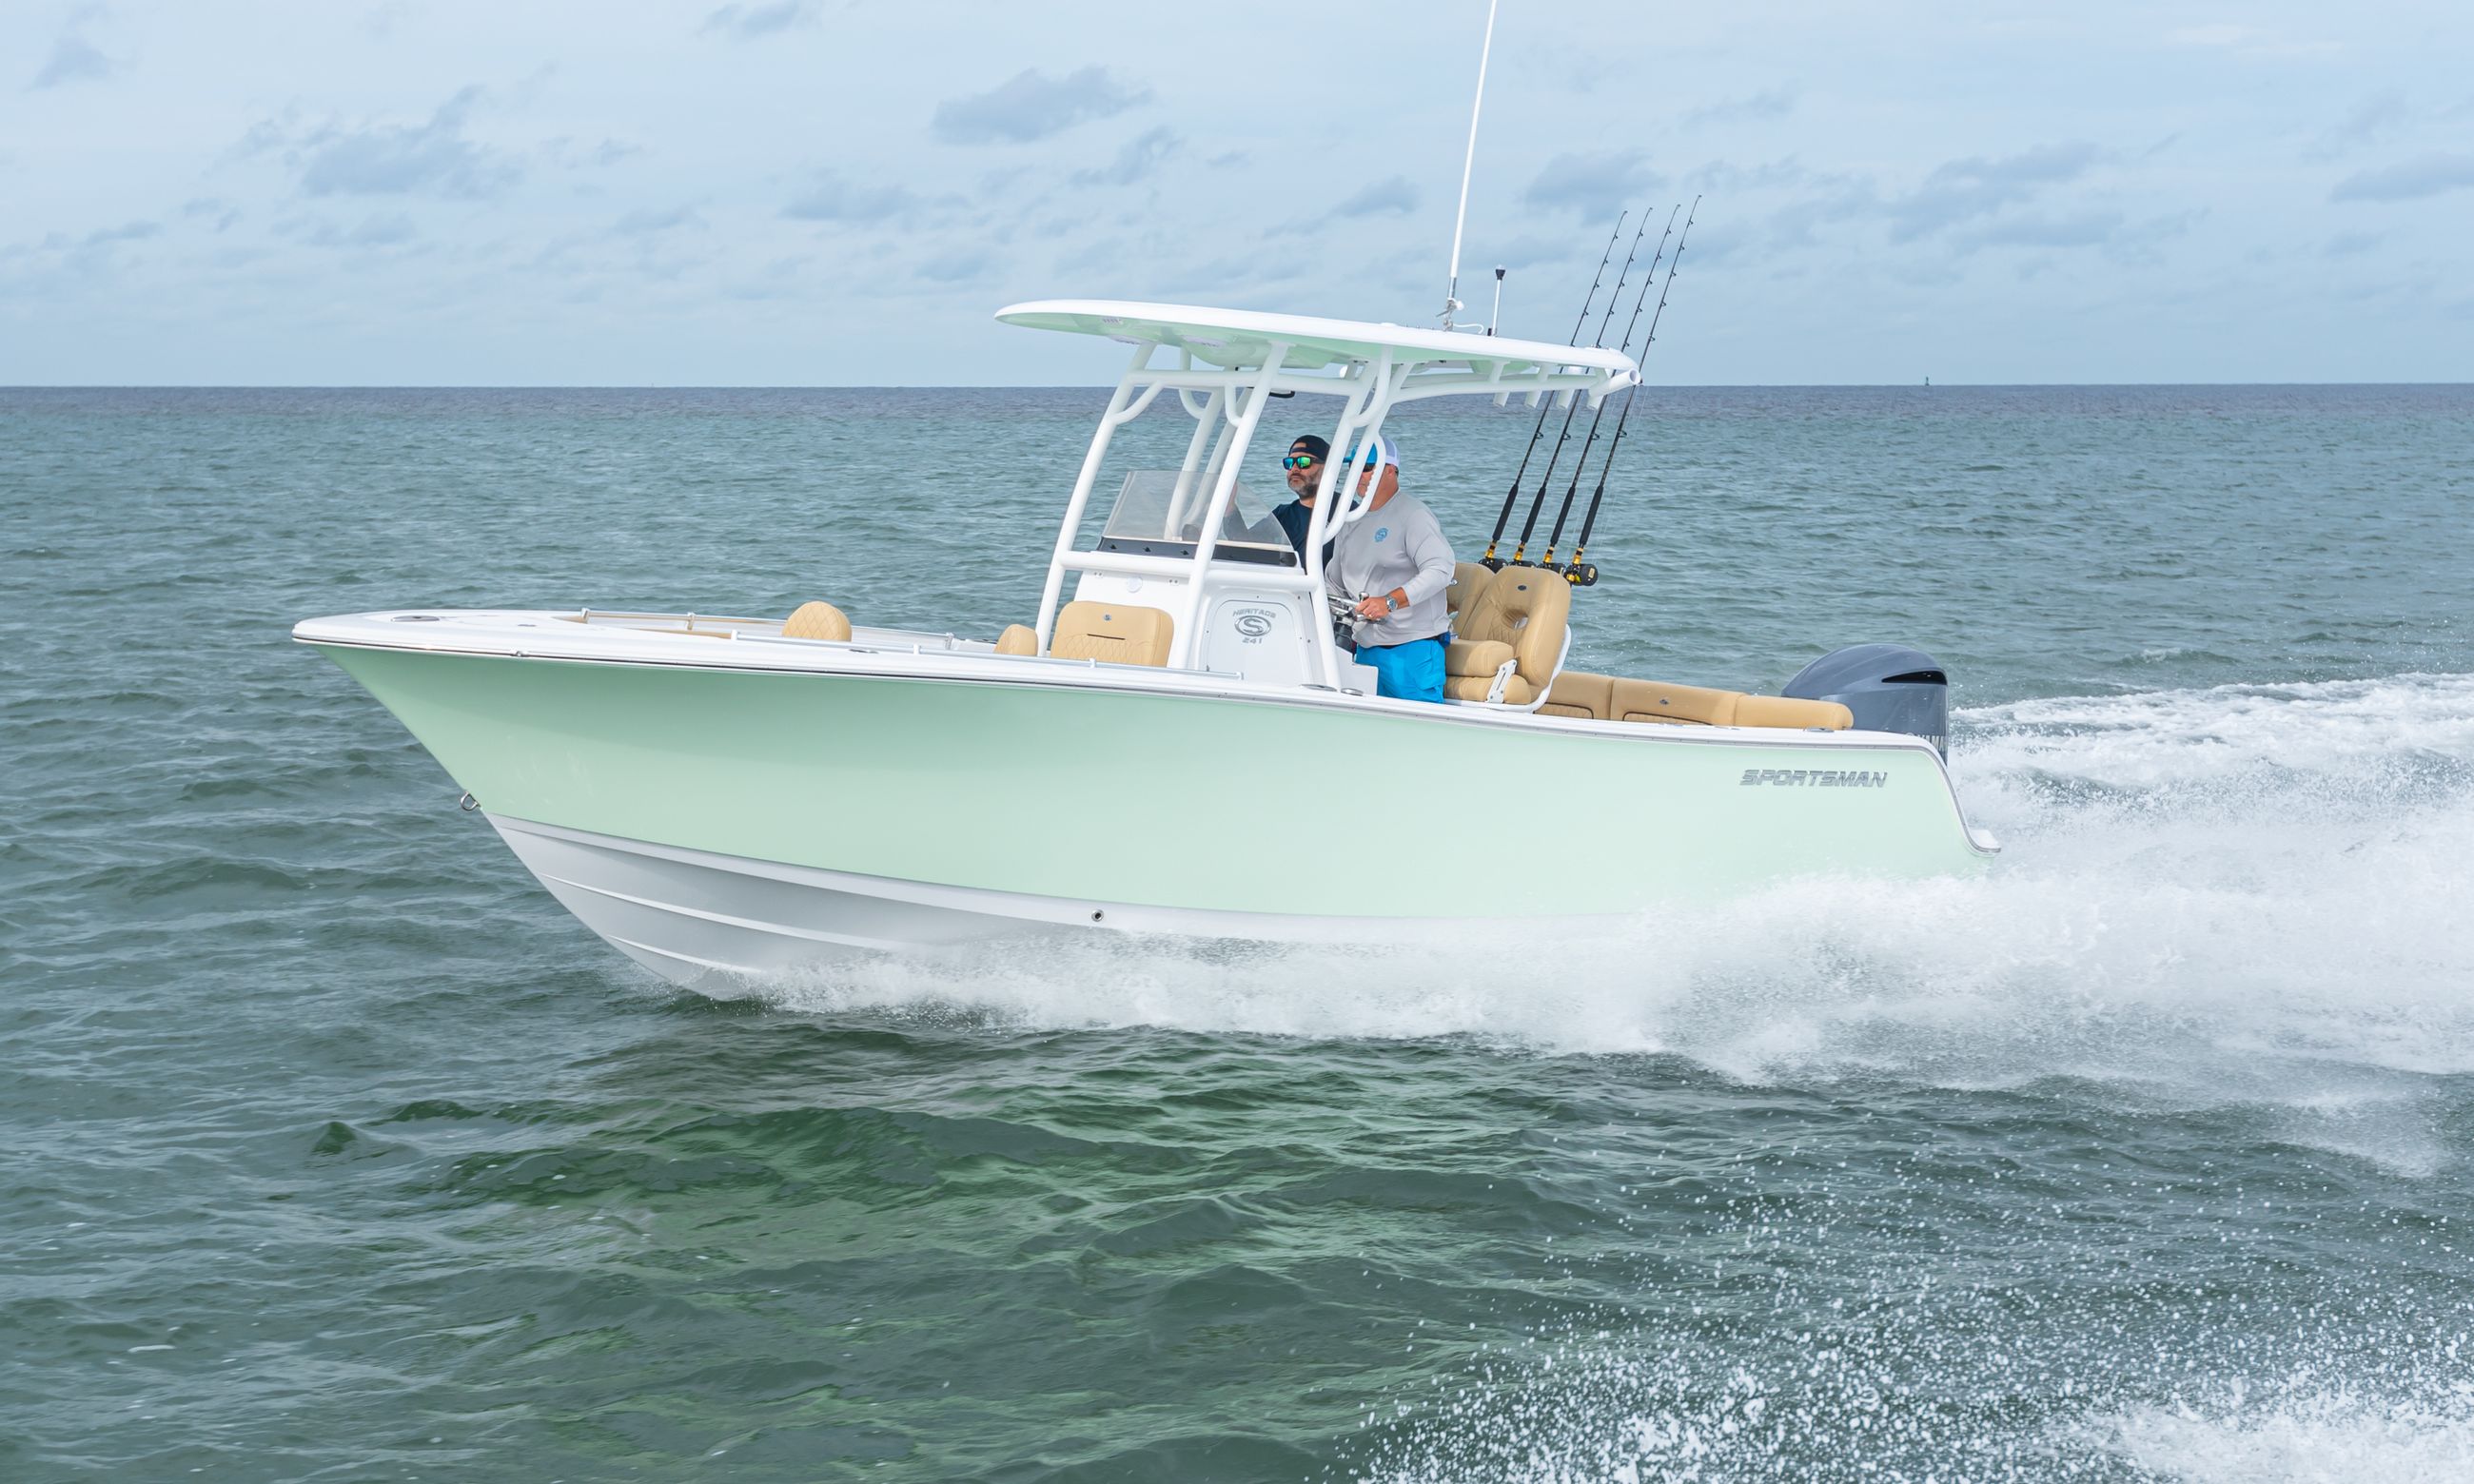 Available options for the 241-center-console